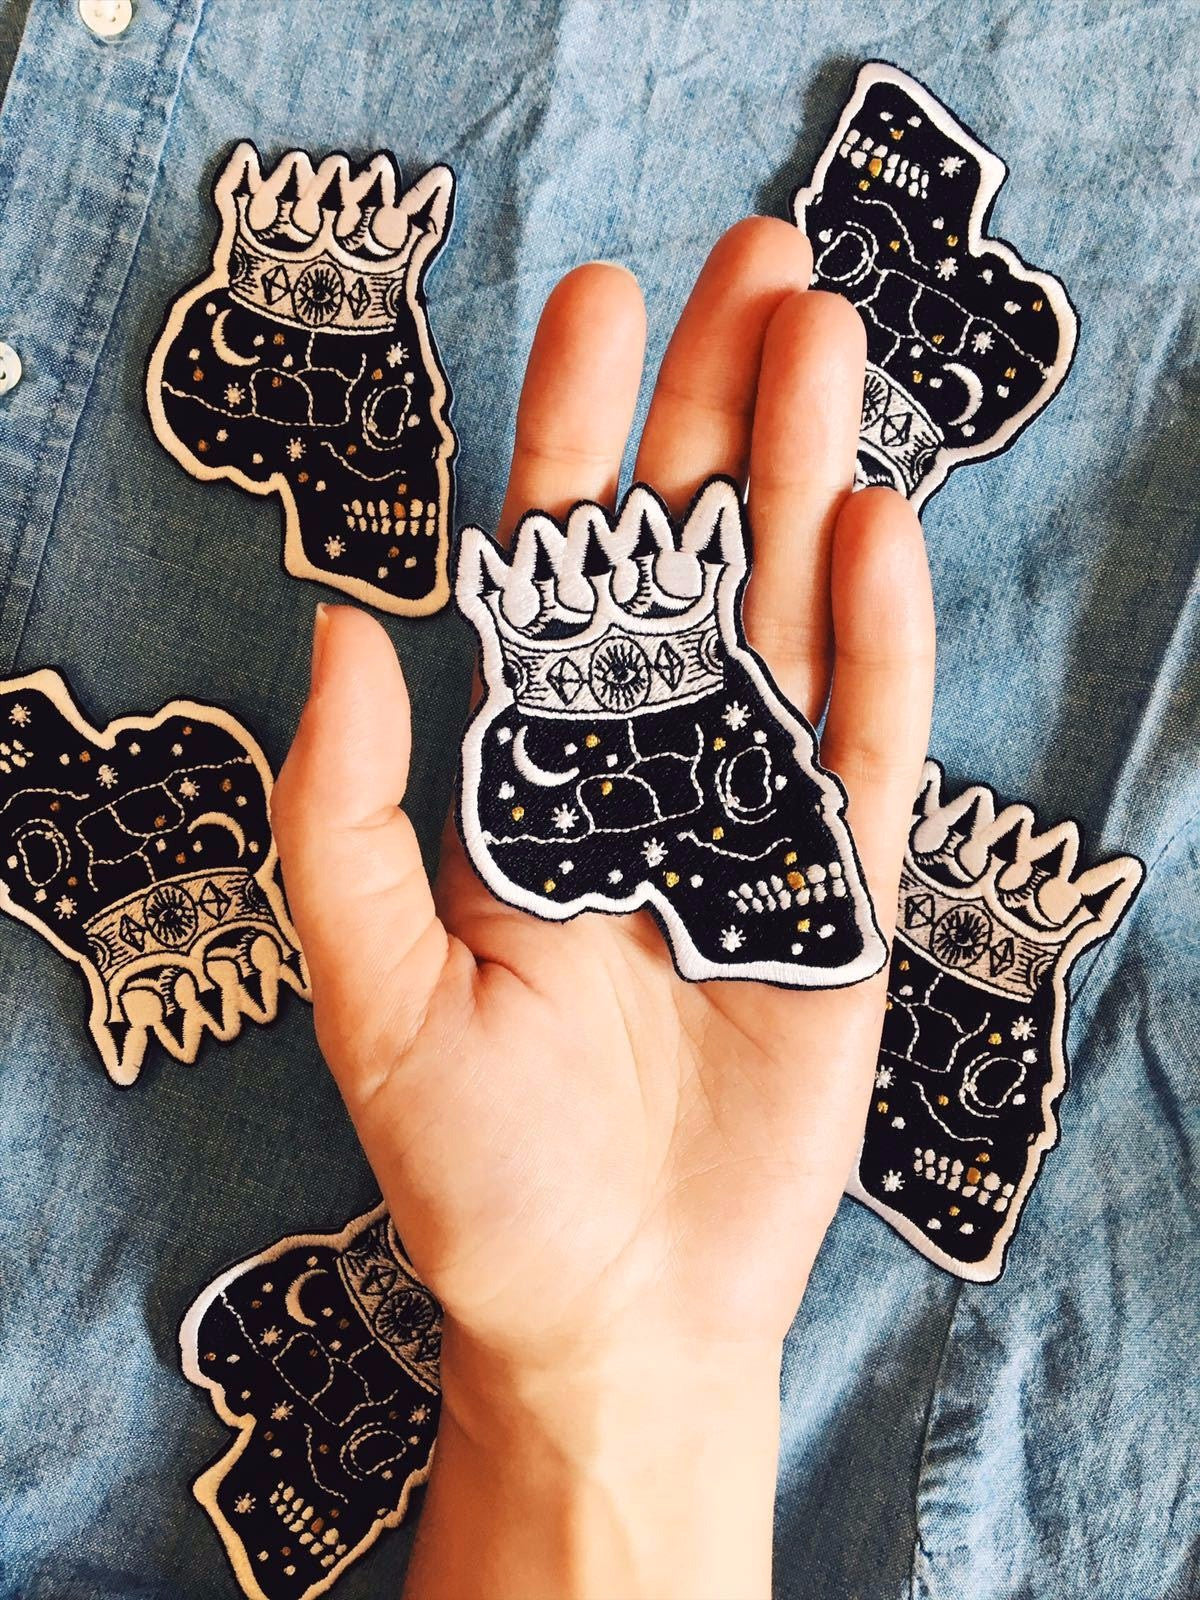 patch_skull_king_space_gold_holding_hand_denim